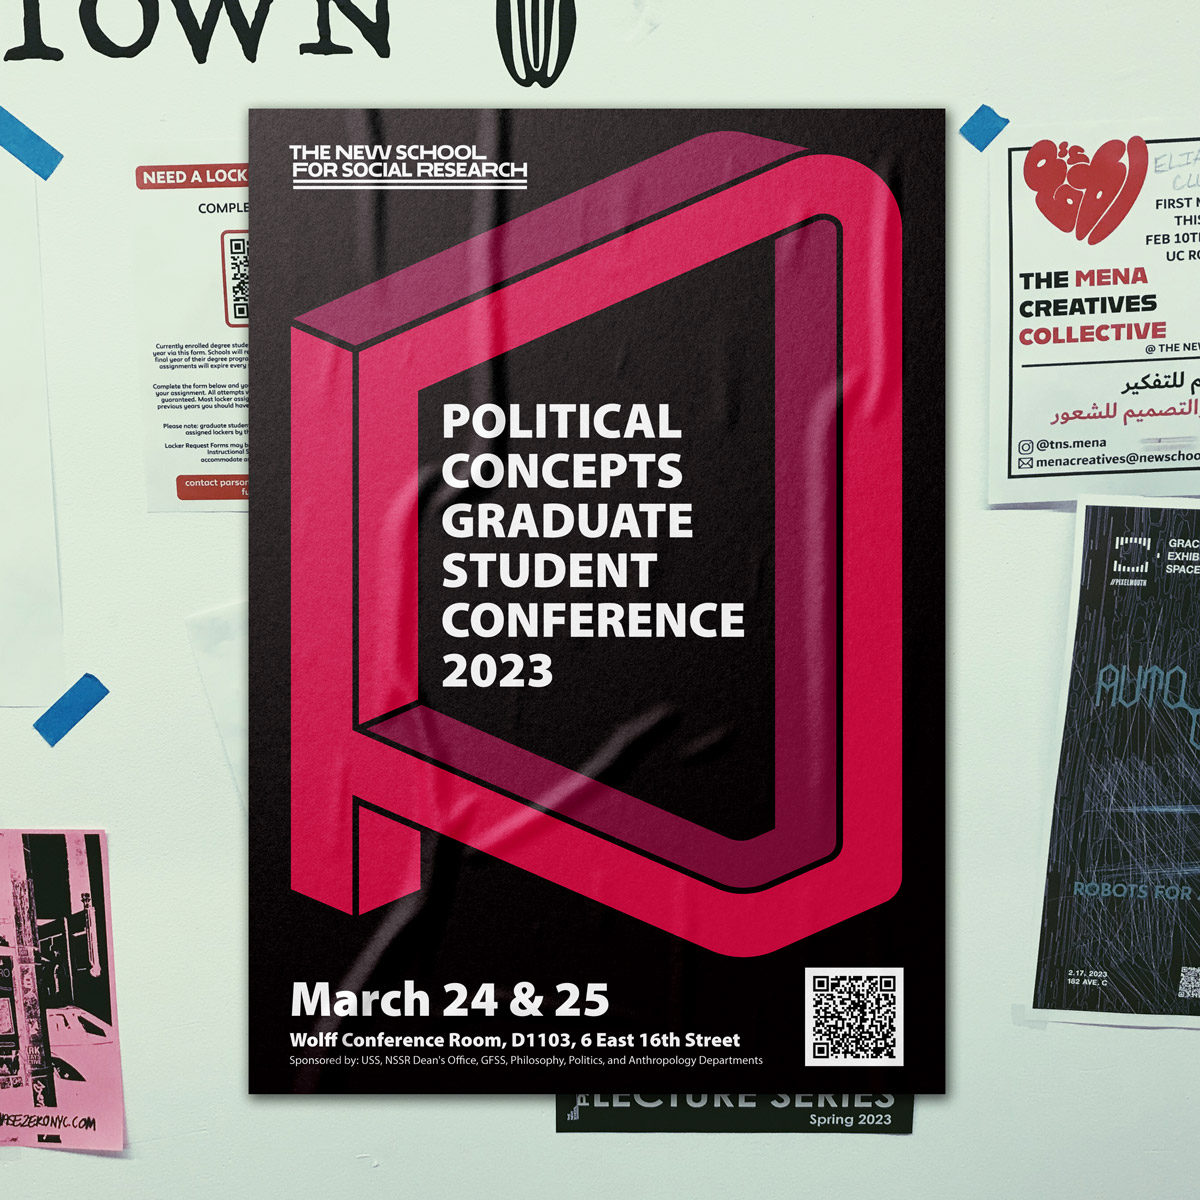 Political concepts conference poster showcasing optical illusion ‘p’, on a dark background